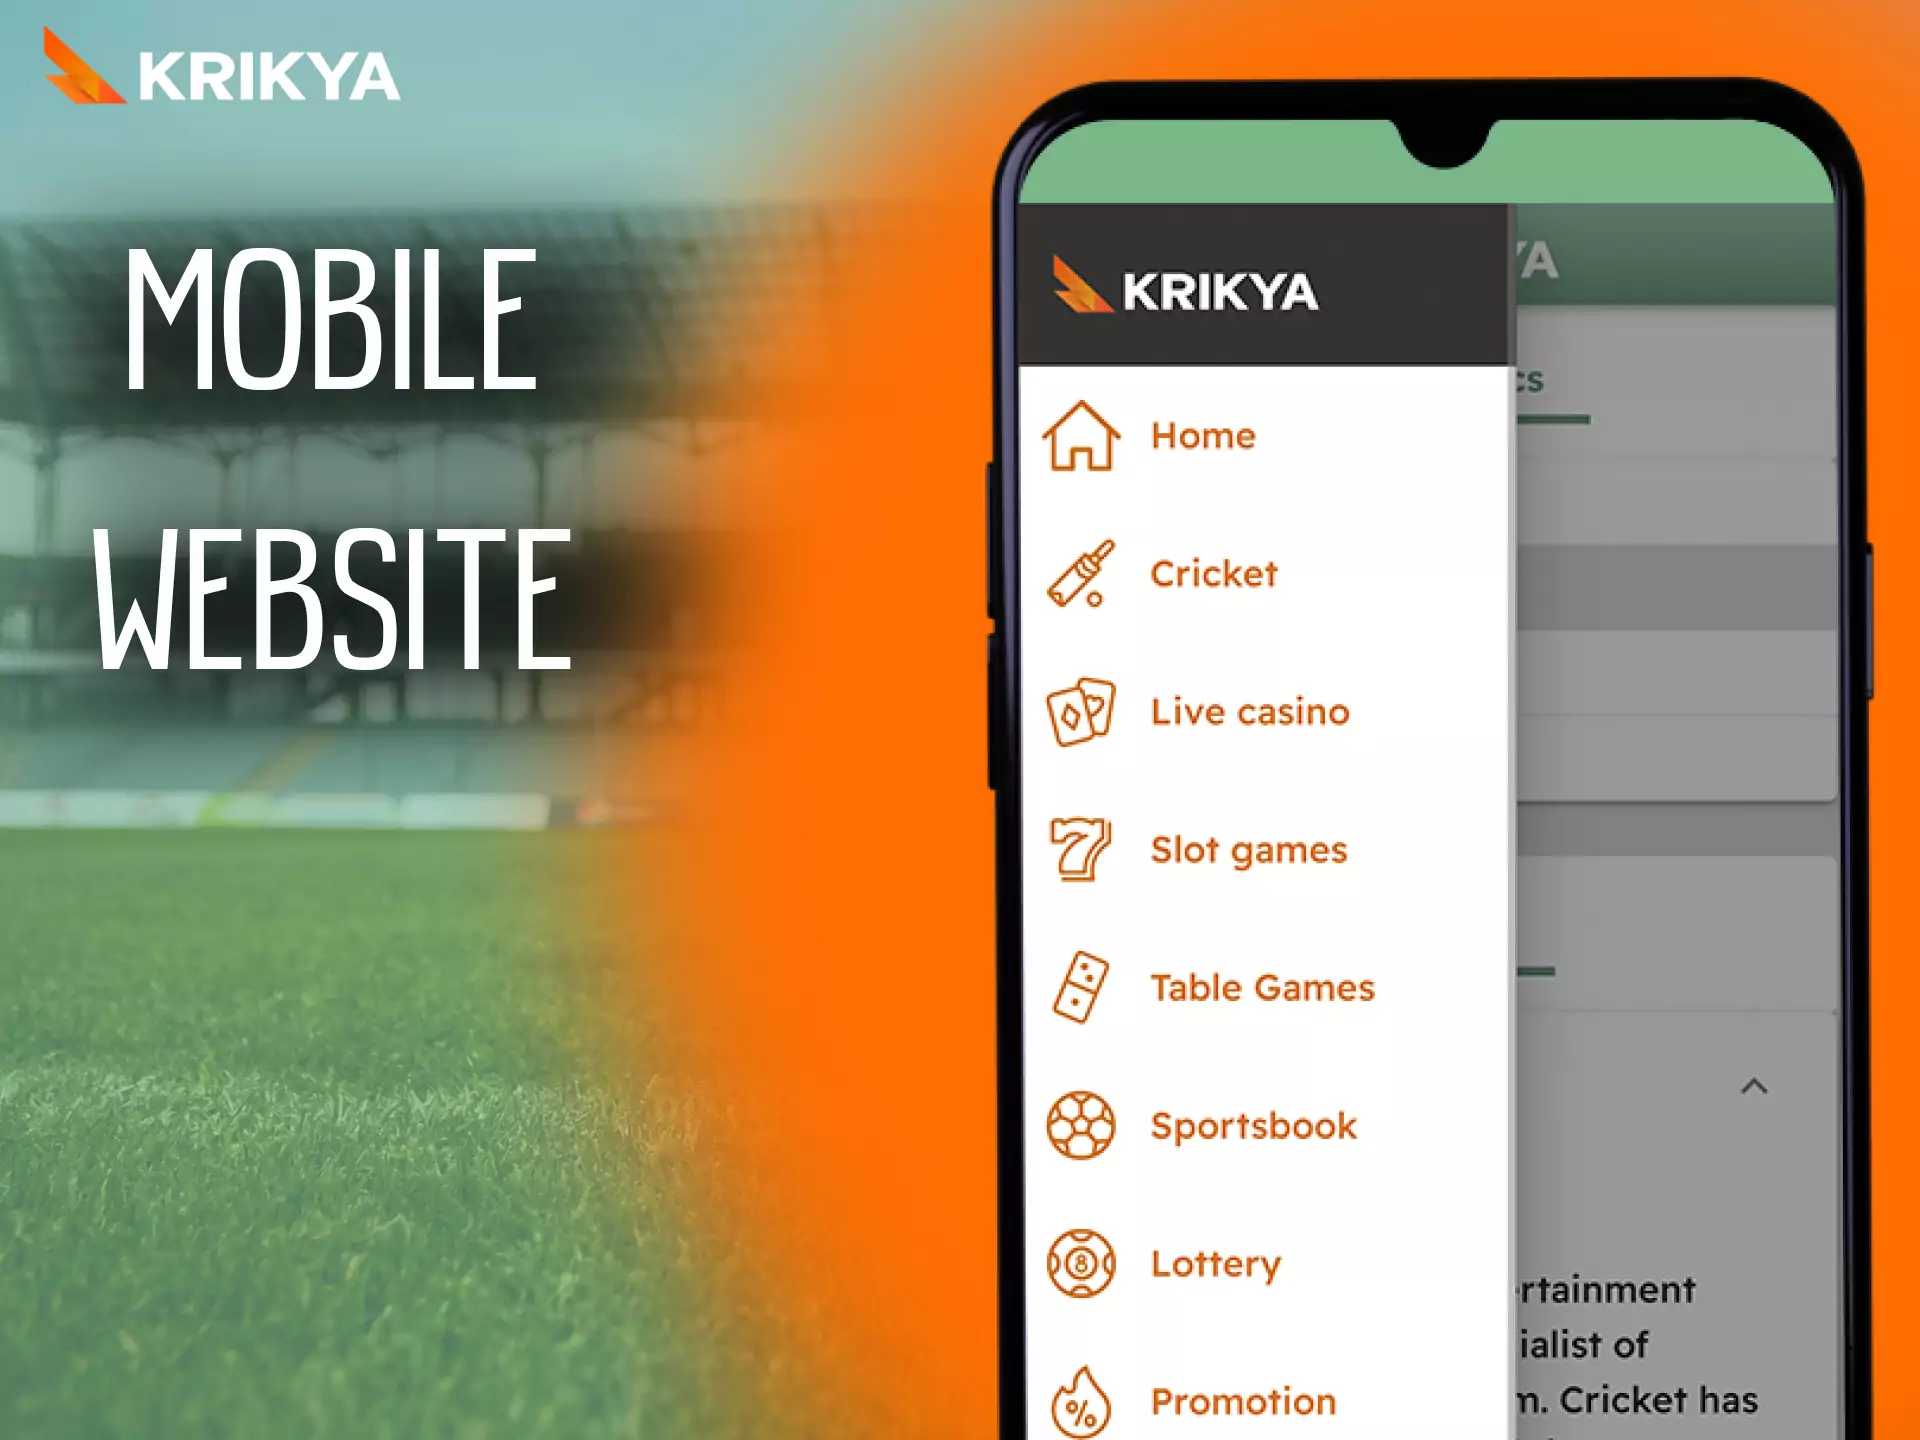 Krikya mobile website has all the necessary features for exciting games.